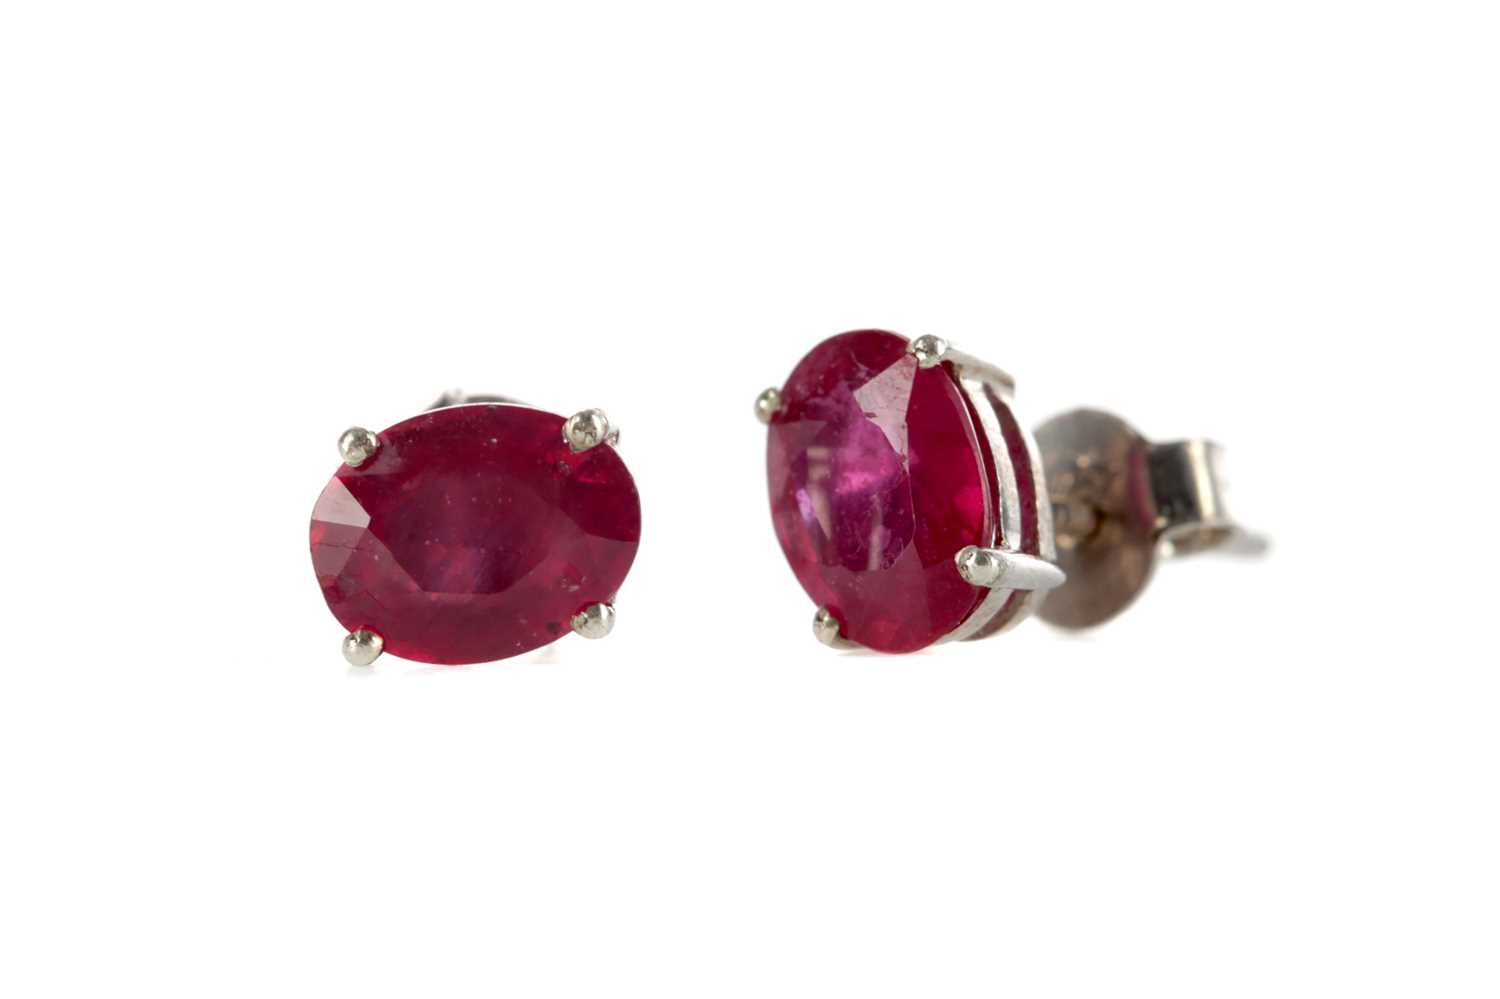 Lot 376 - A PAIR OF TREATED RUBY EARRINGS